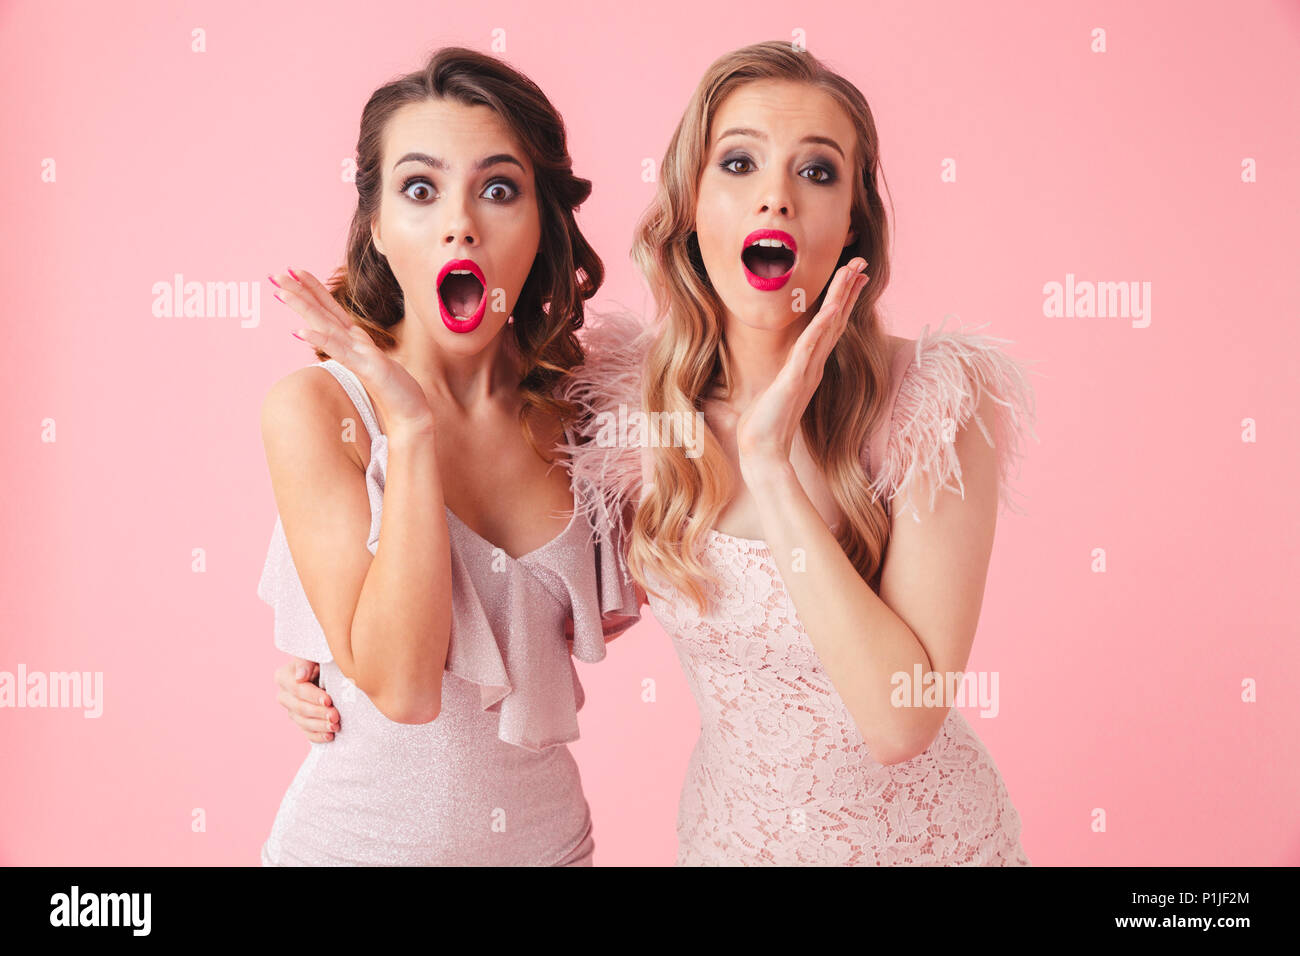 Two shocked women in dresses hugging to each other and looking at the camera with open mouth over pink background Stock Photo